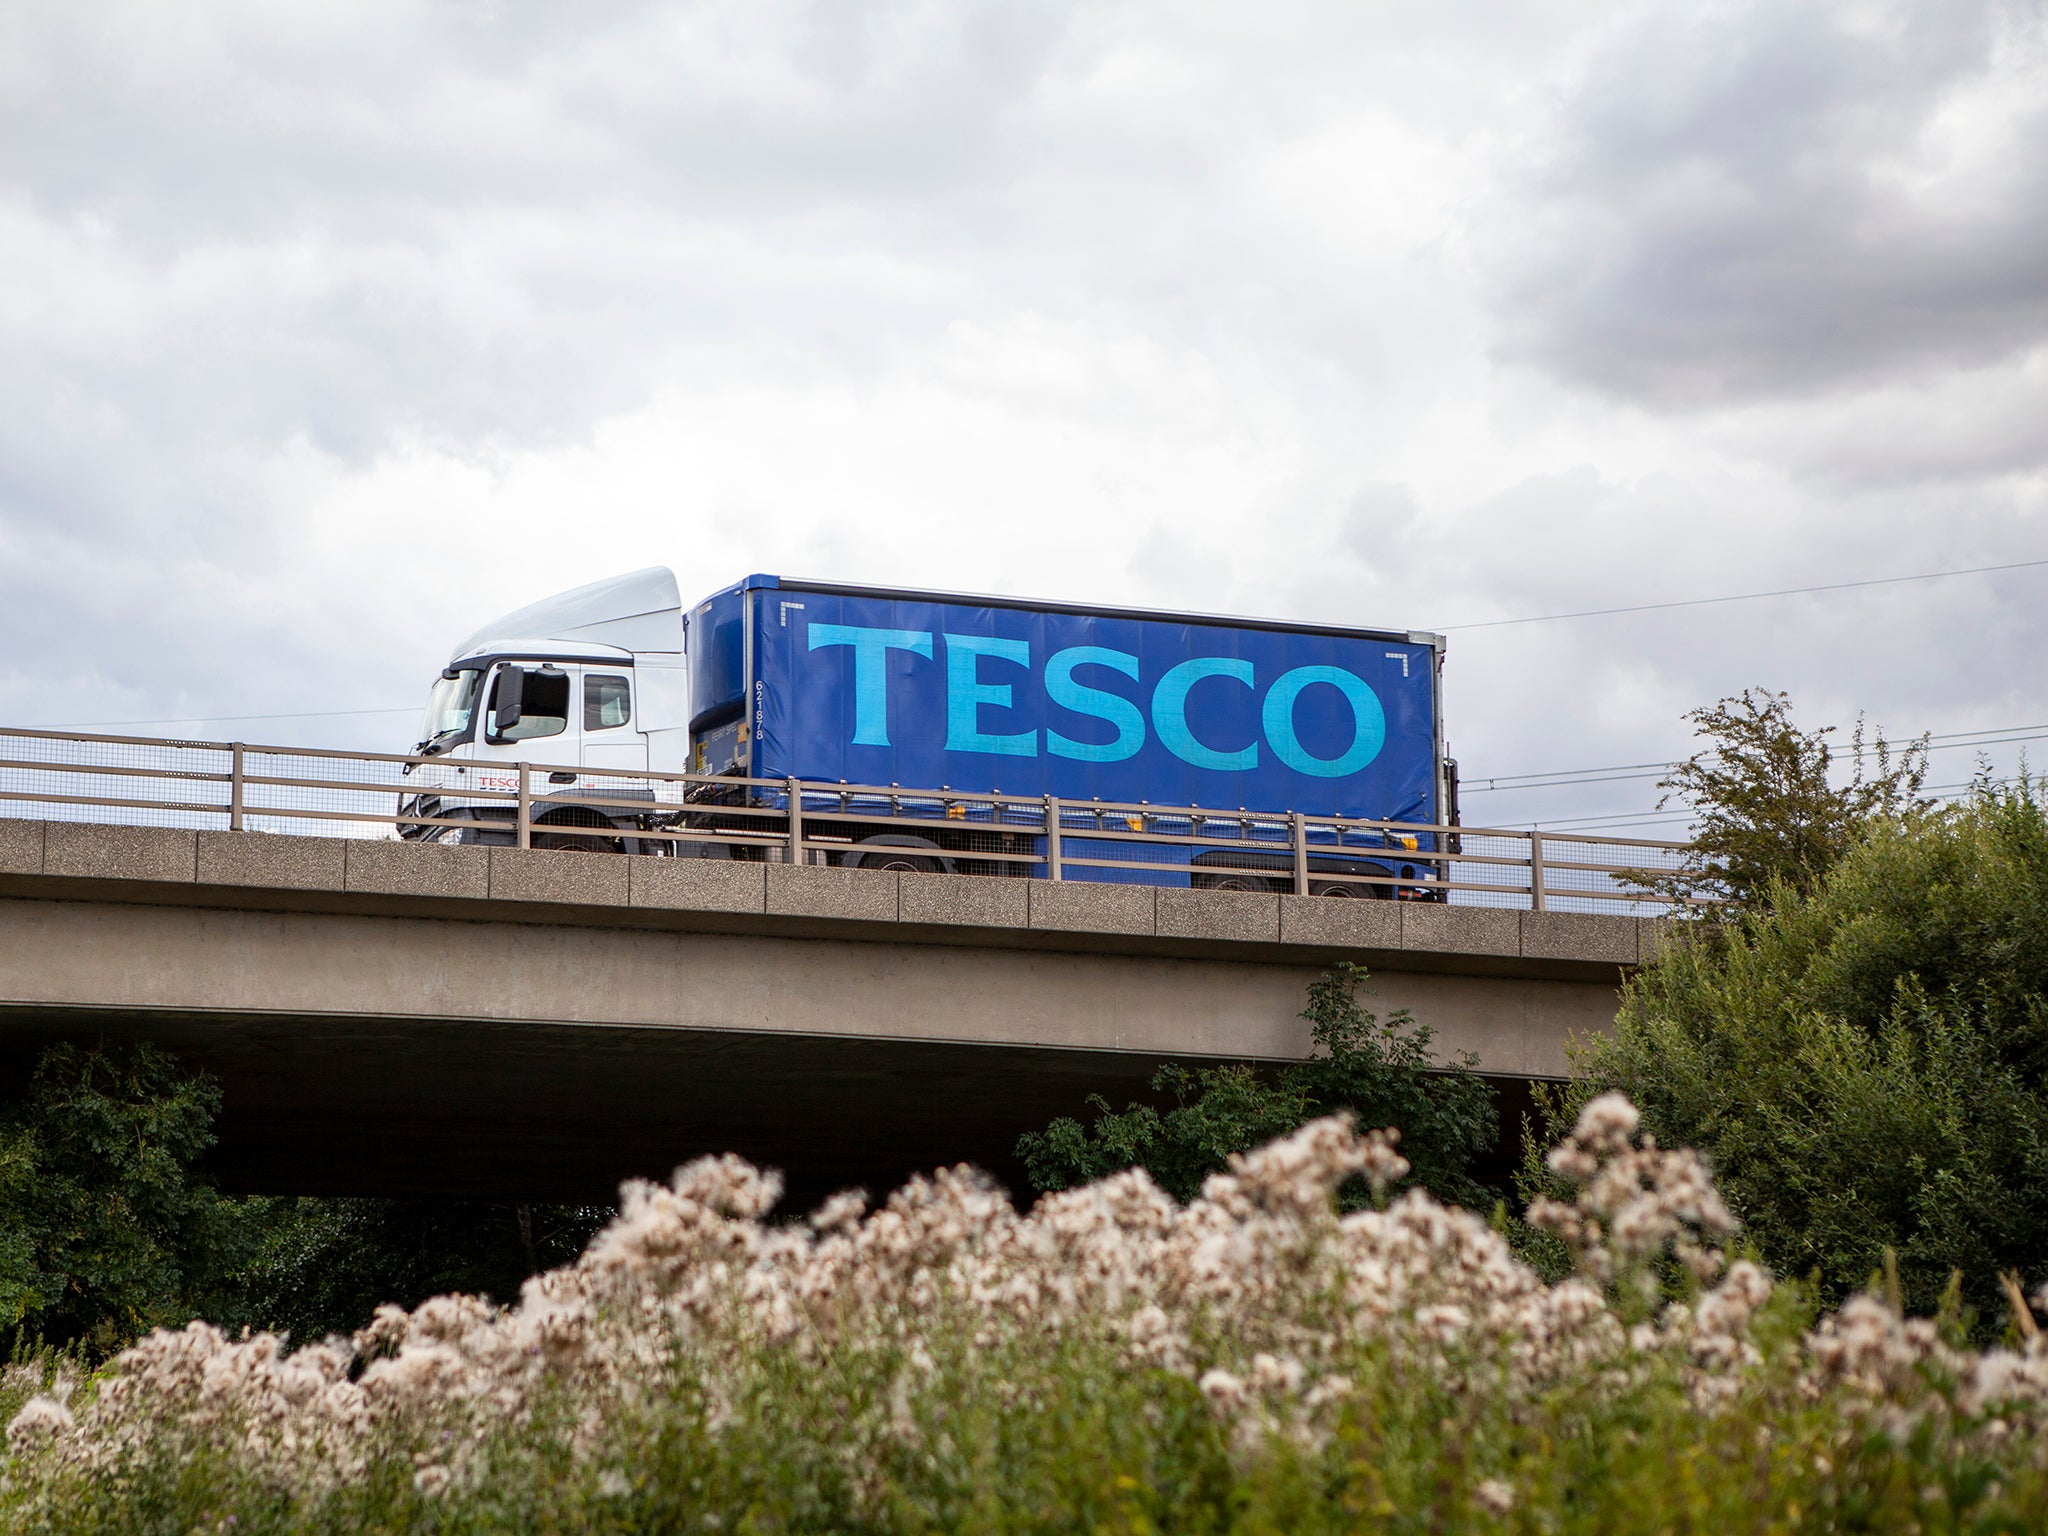 Tesco recently became the first chain to use electric delivery lorries in a bid to make their delivery system more eco-friendly